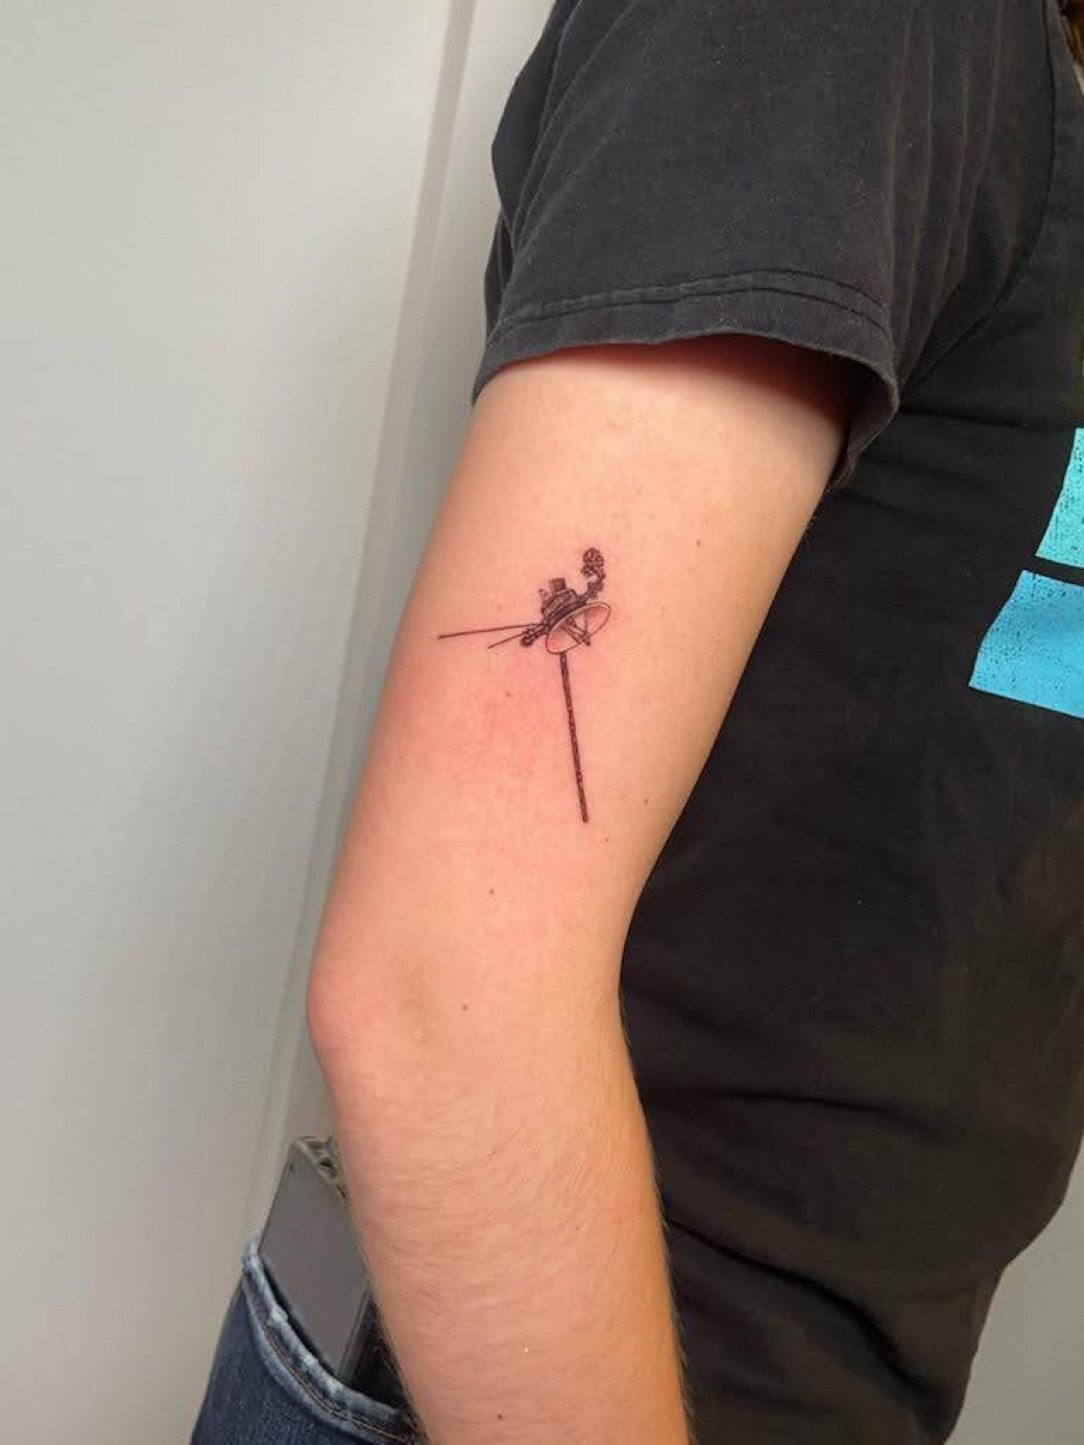 Heard we&#039;re showing off our Voyager tattoos?